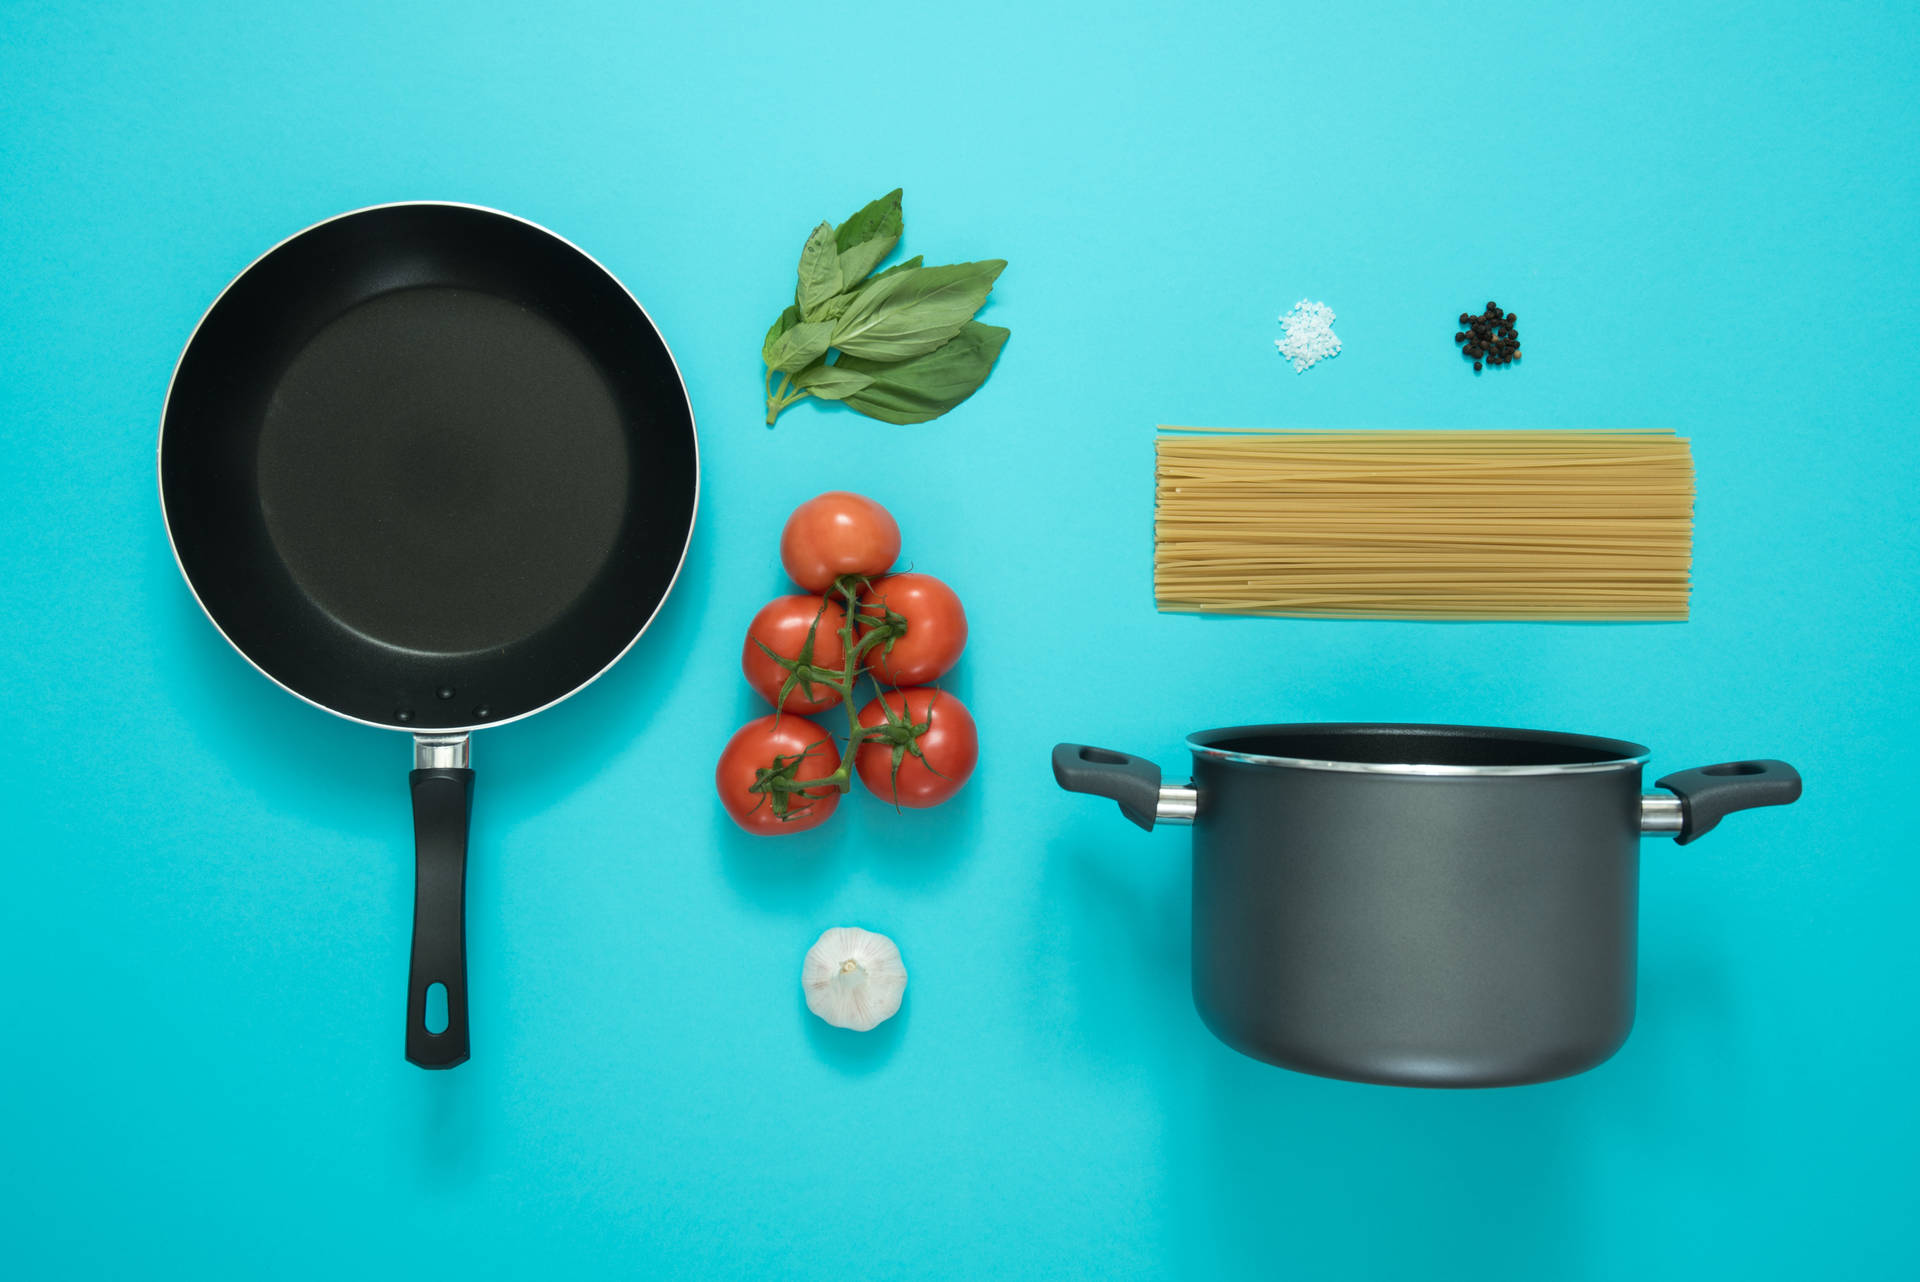 Get creative in the kitchen with these cute cooking essentials! Wallpaper